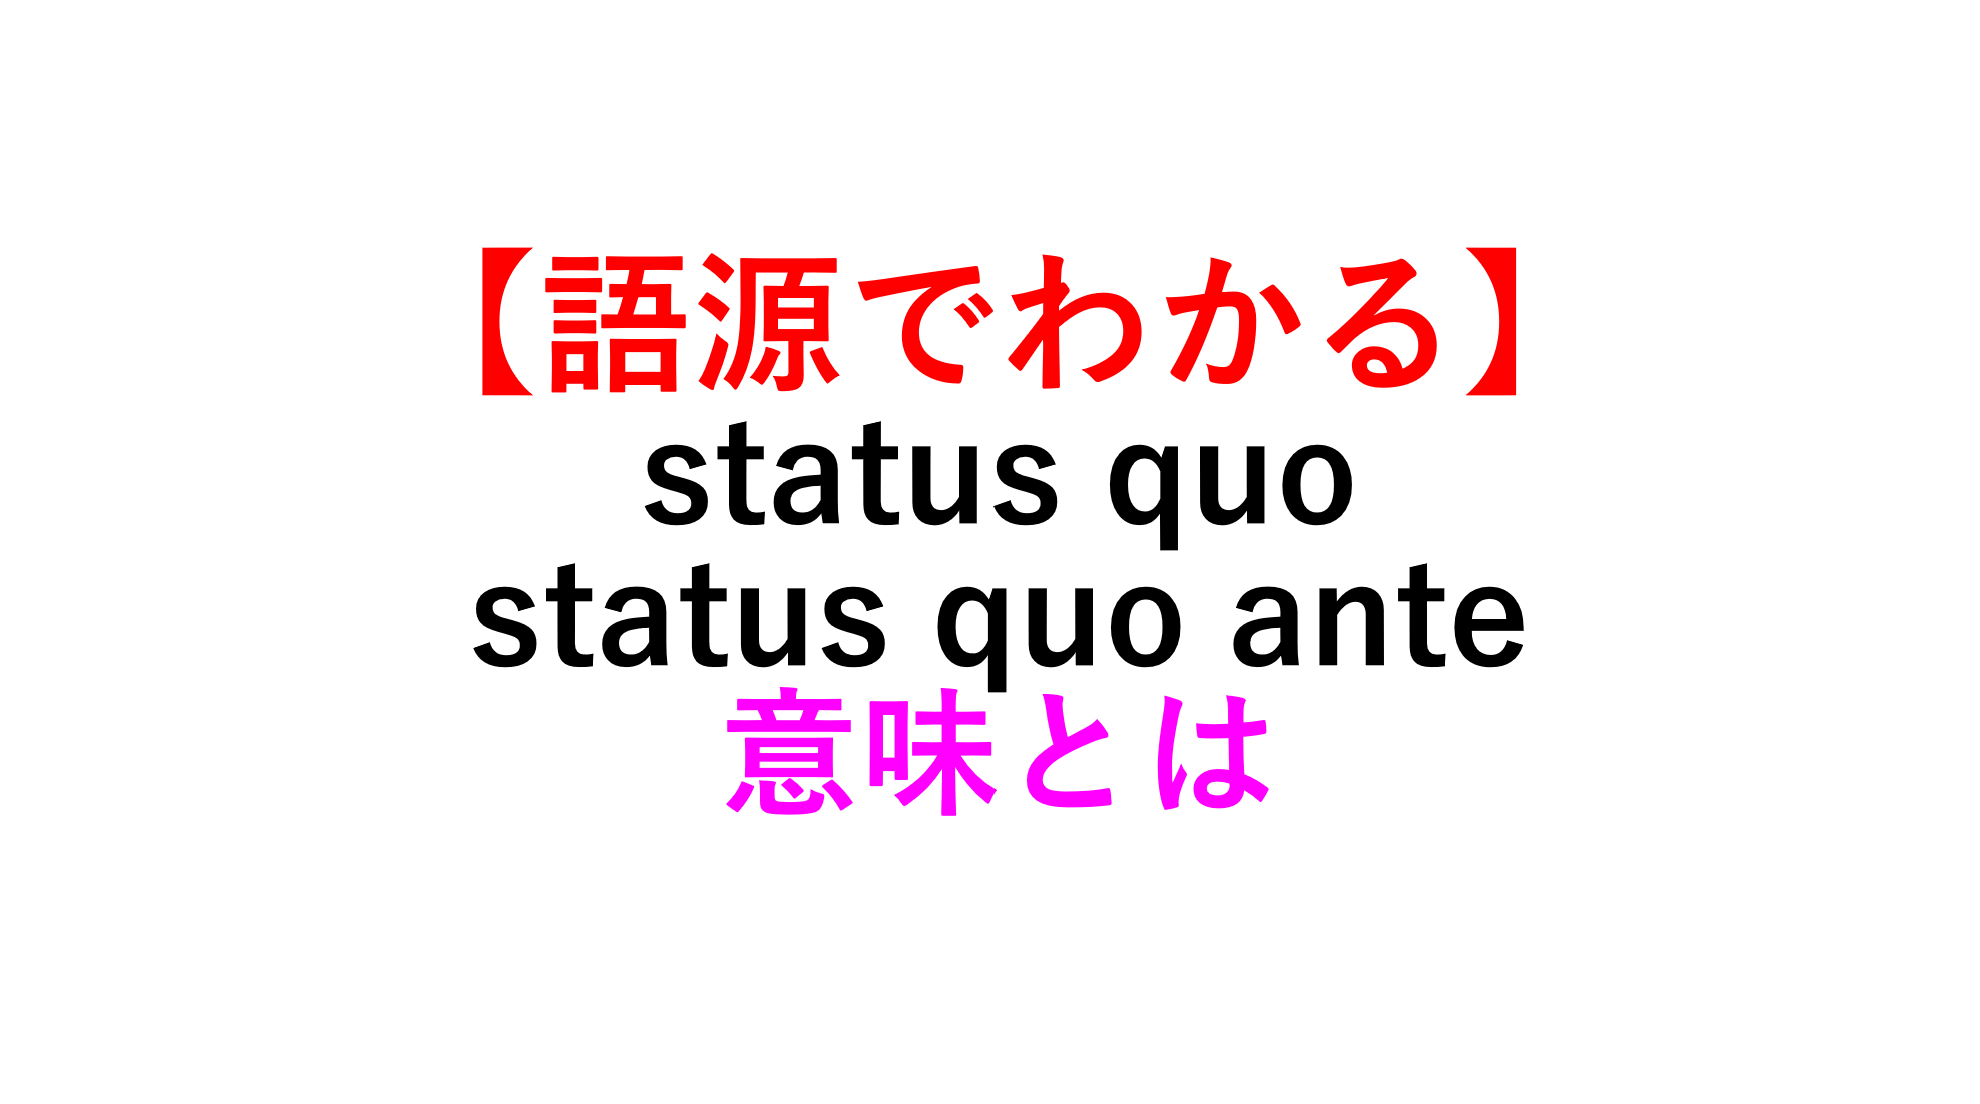 Content with the status quoとはどういう意味ですか？